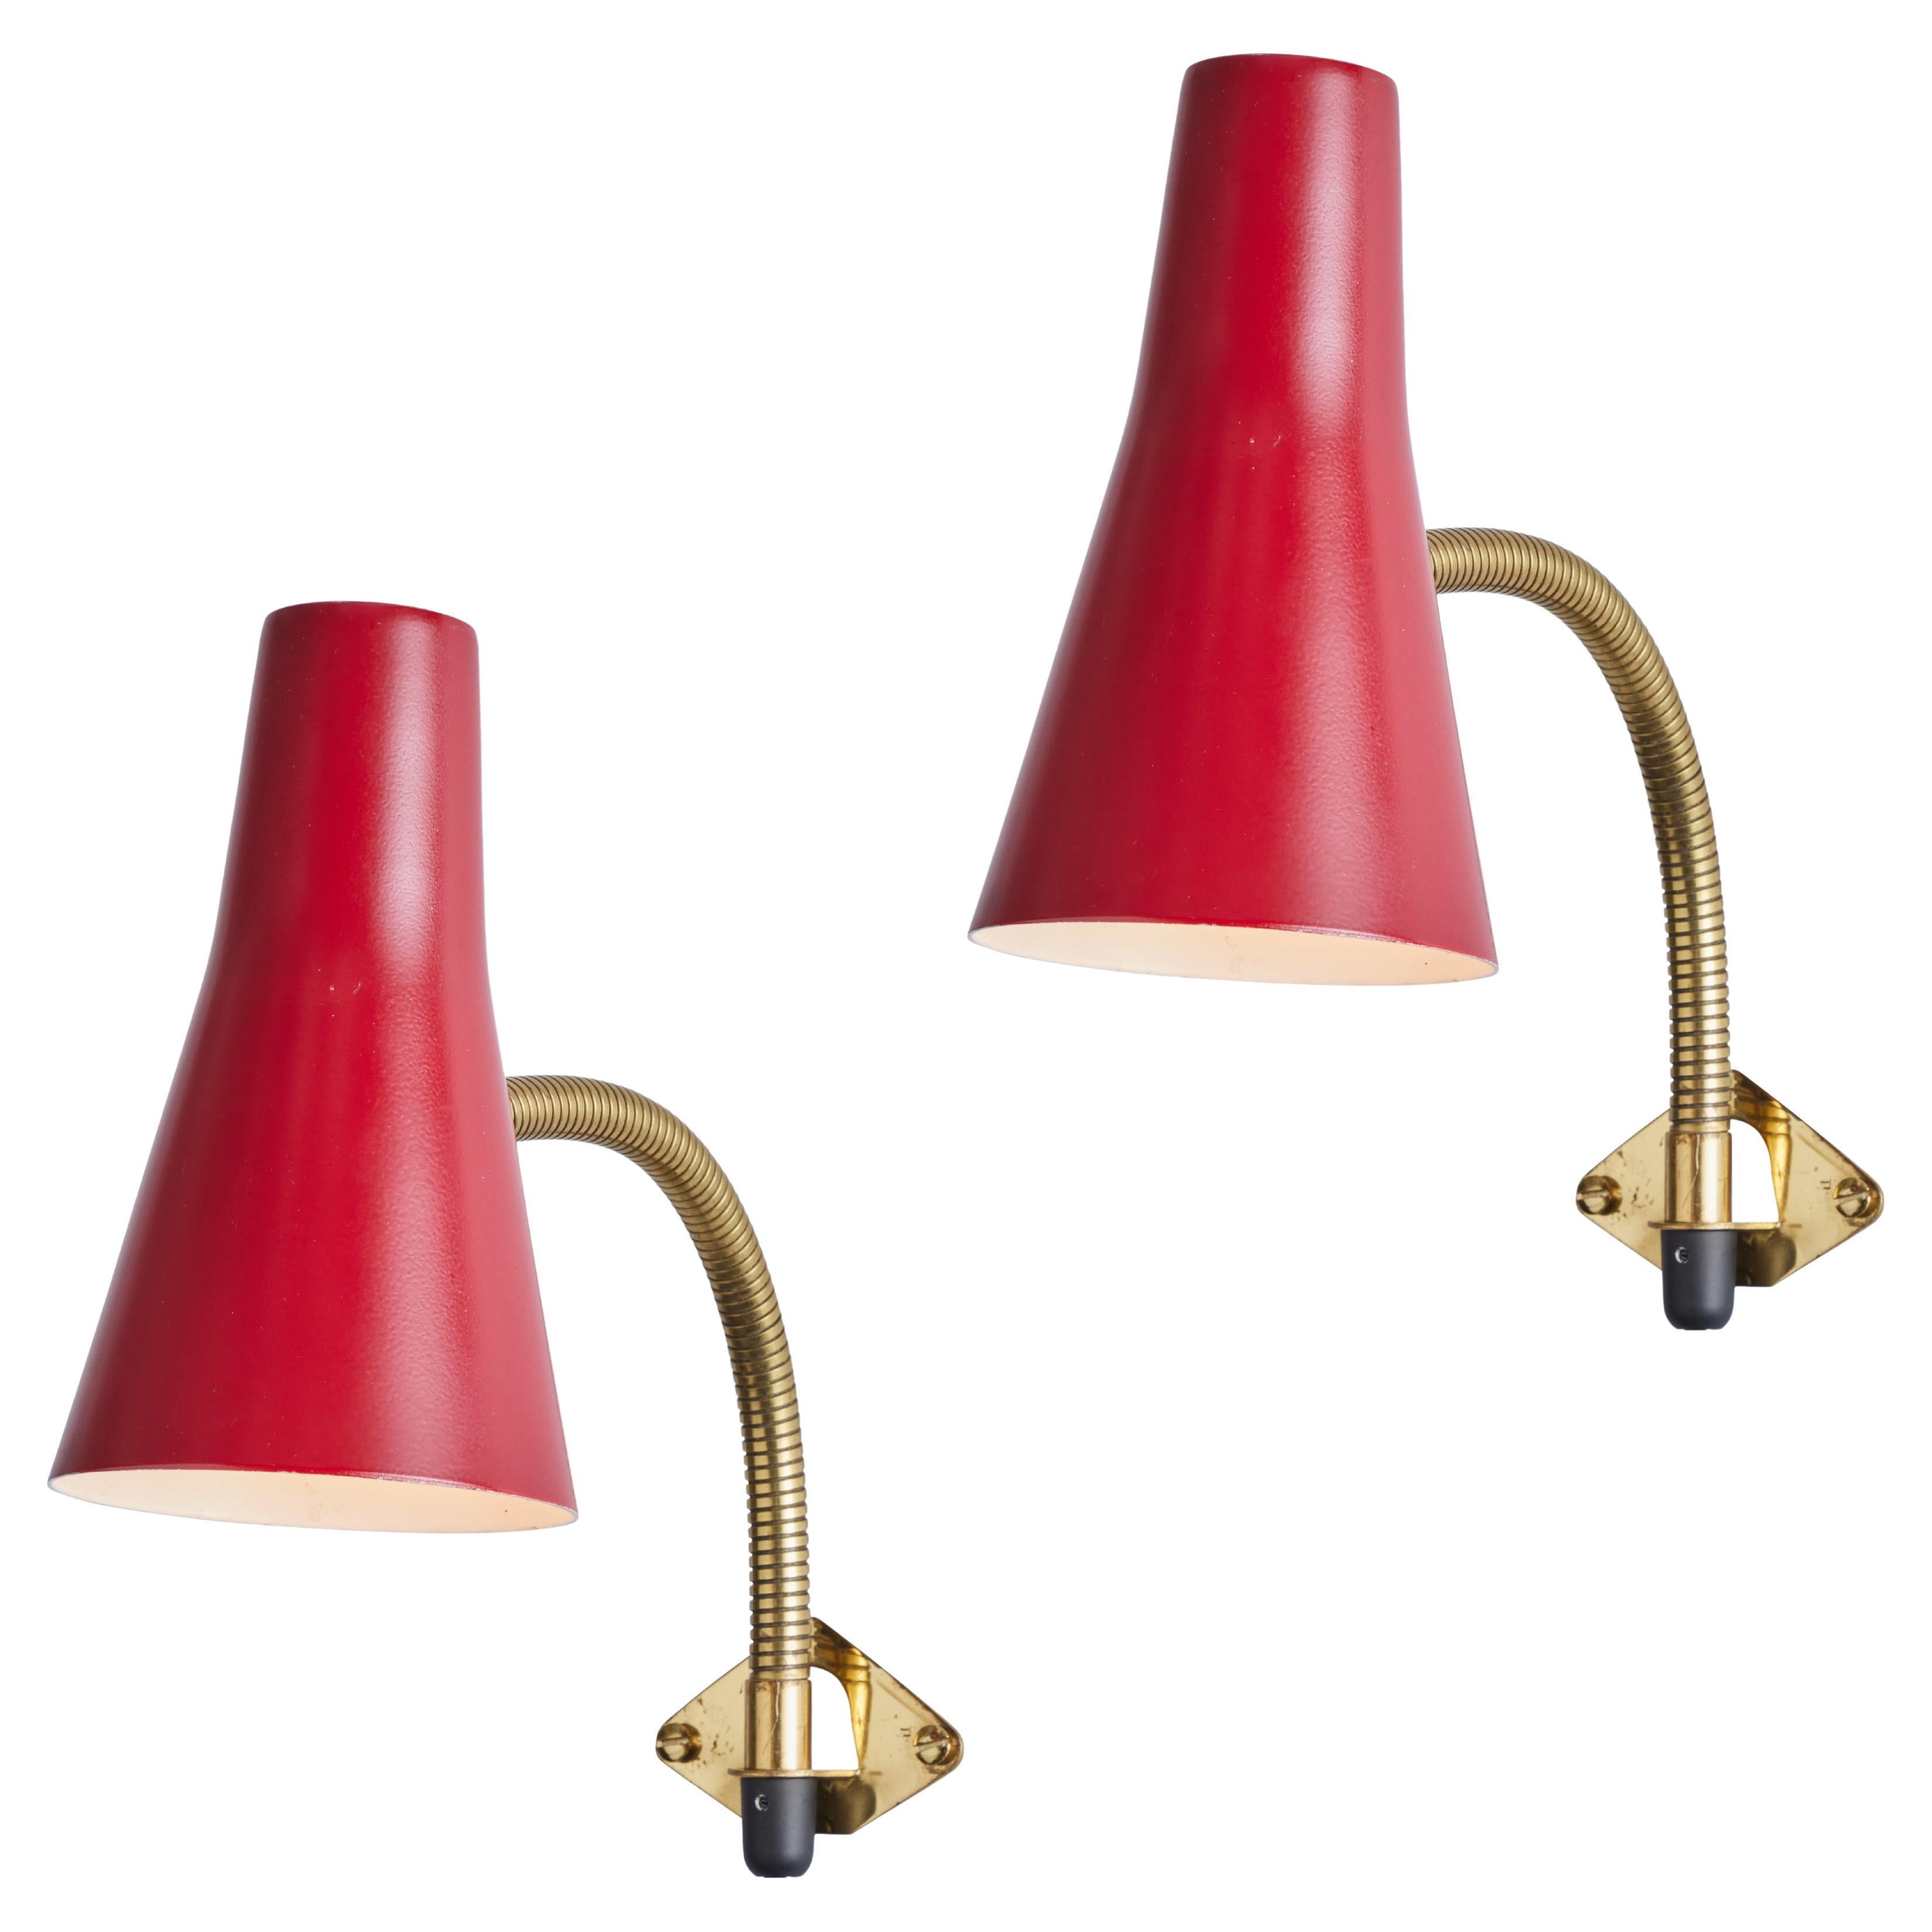 Pair of 1950s Lisa Johansson Pape Red Adjustable Wall Lights for Stockmann Orno For Sale